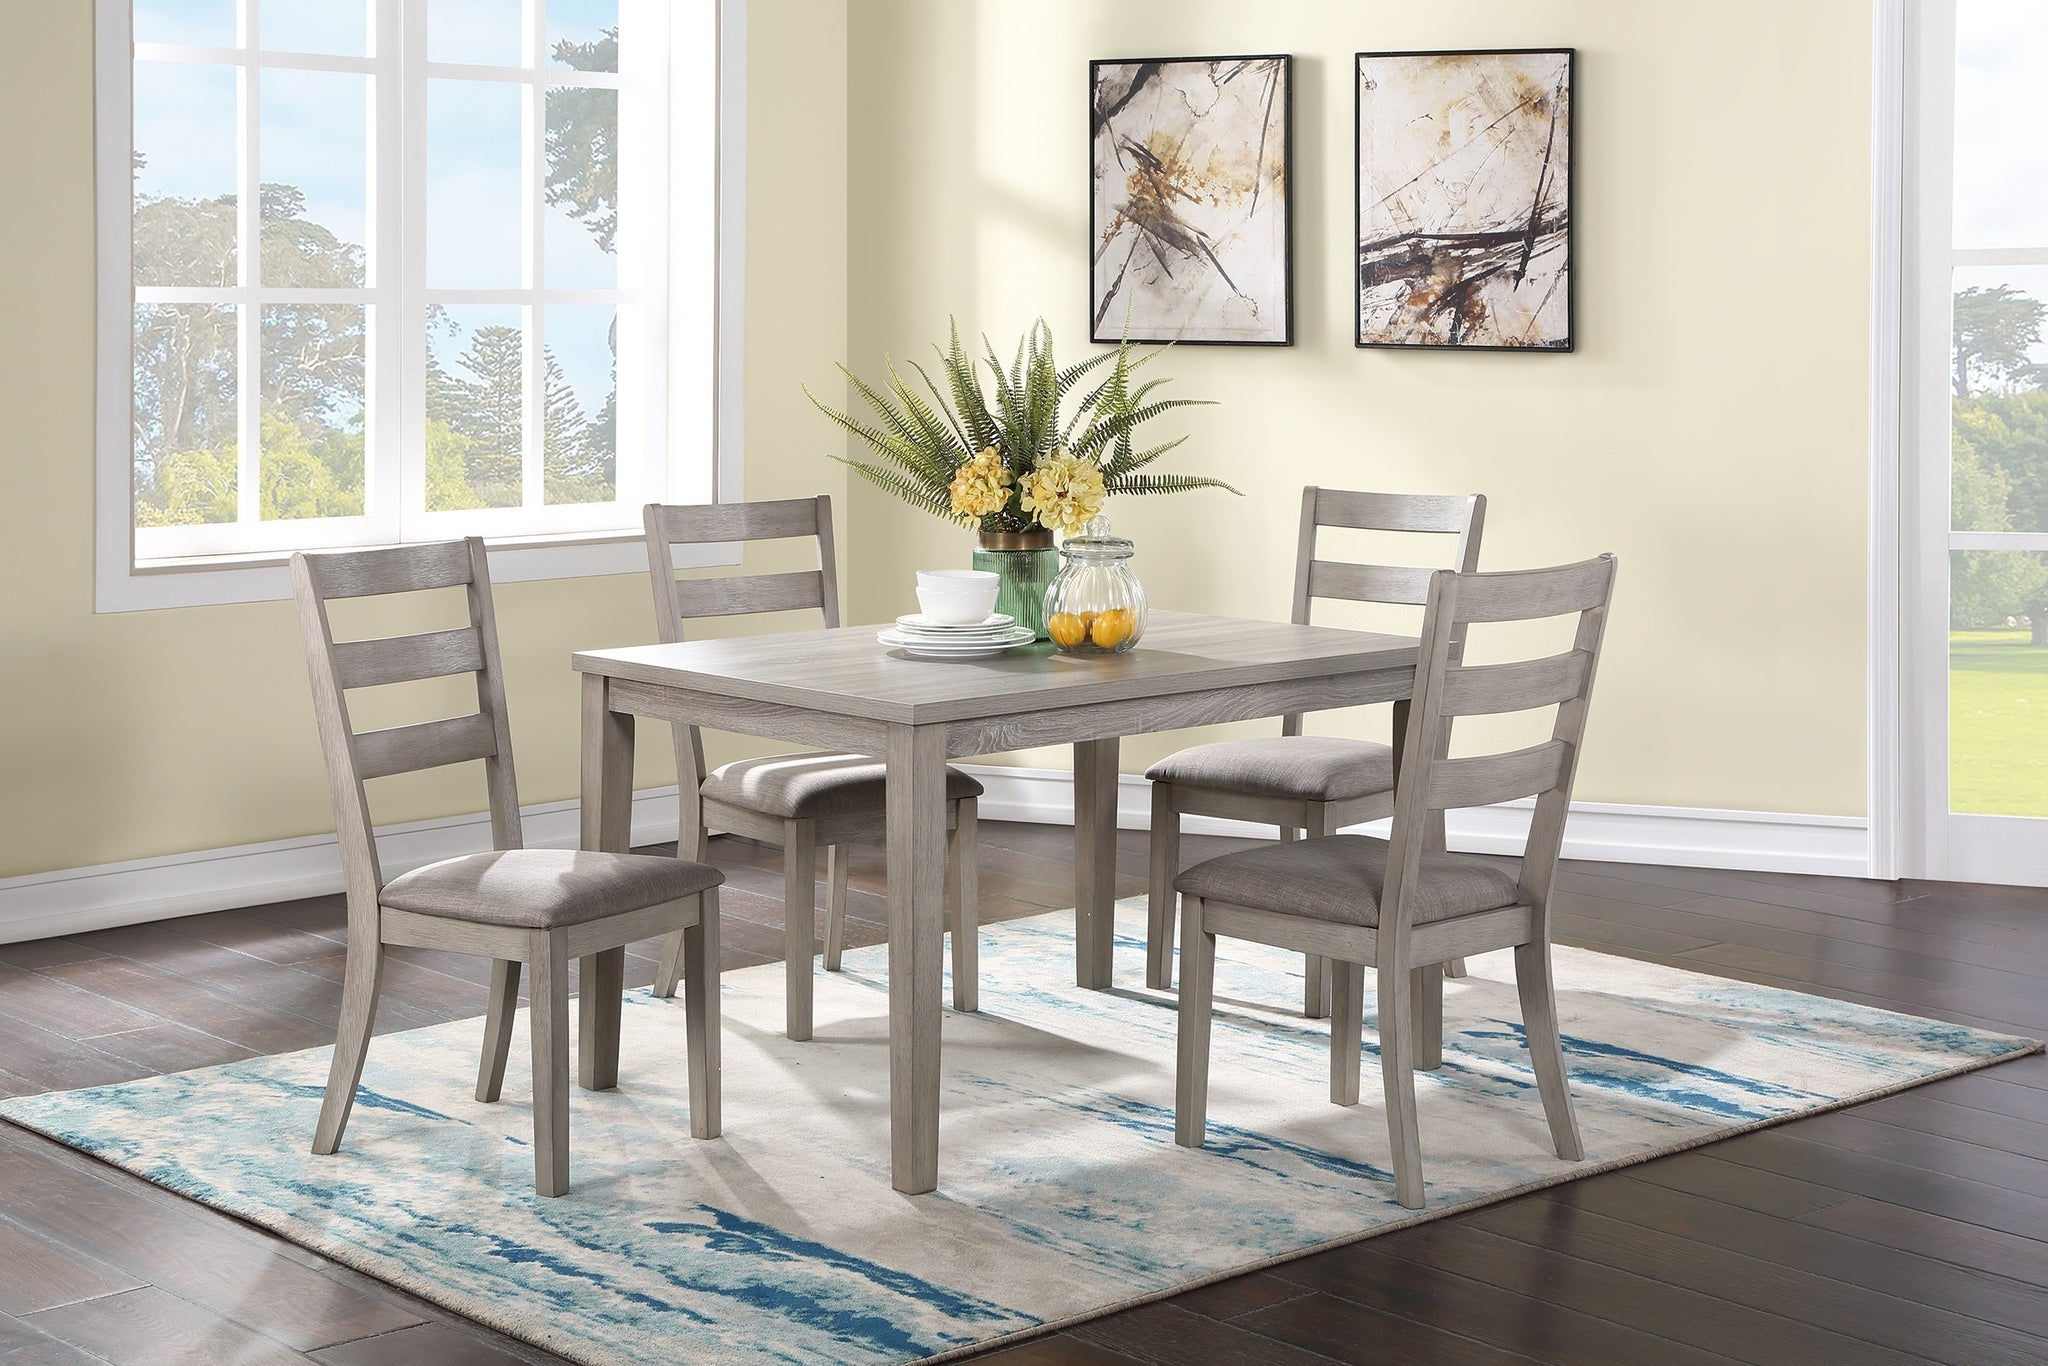 Natural Simple Wooden Table Top 7pc Dining Set Dining